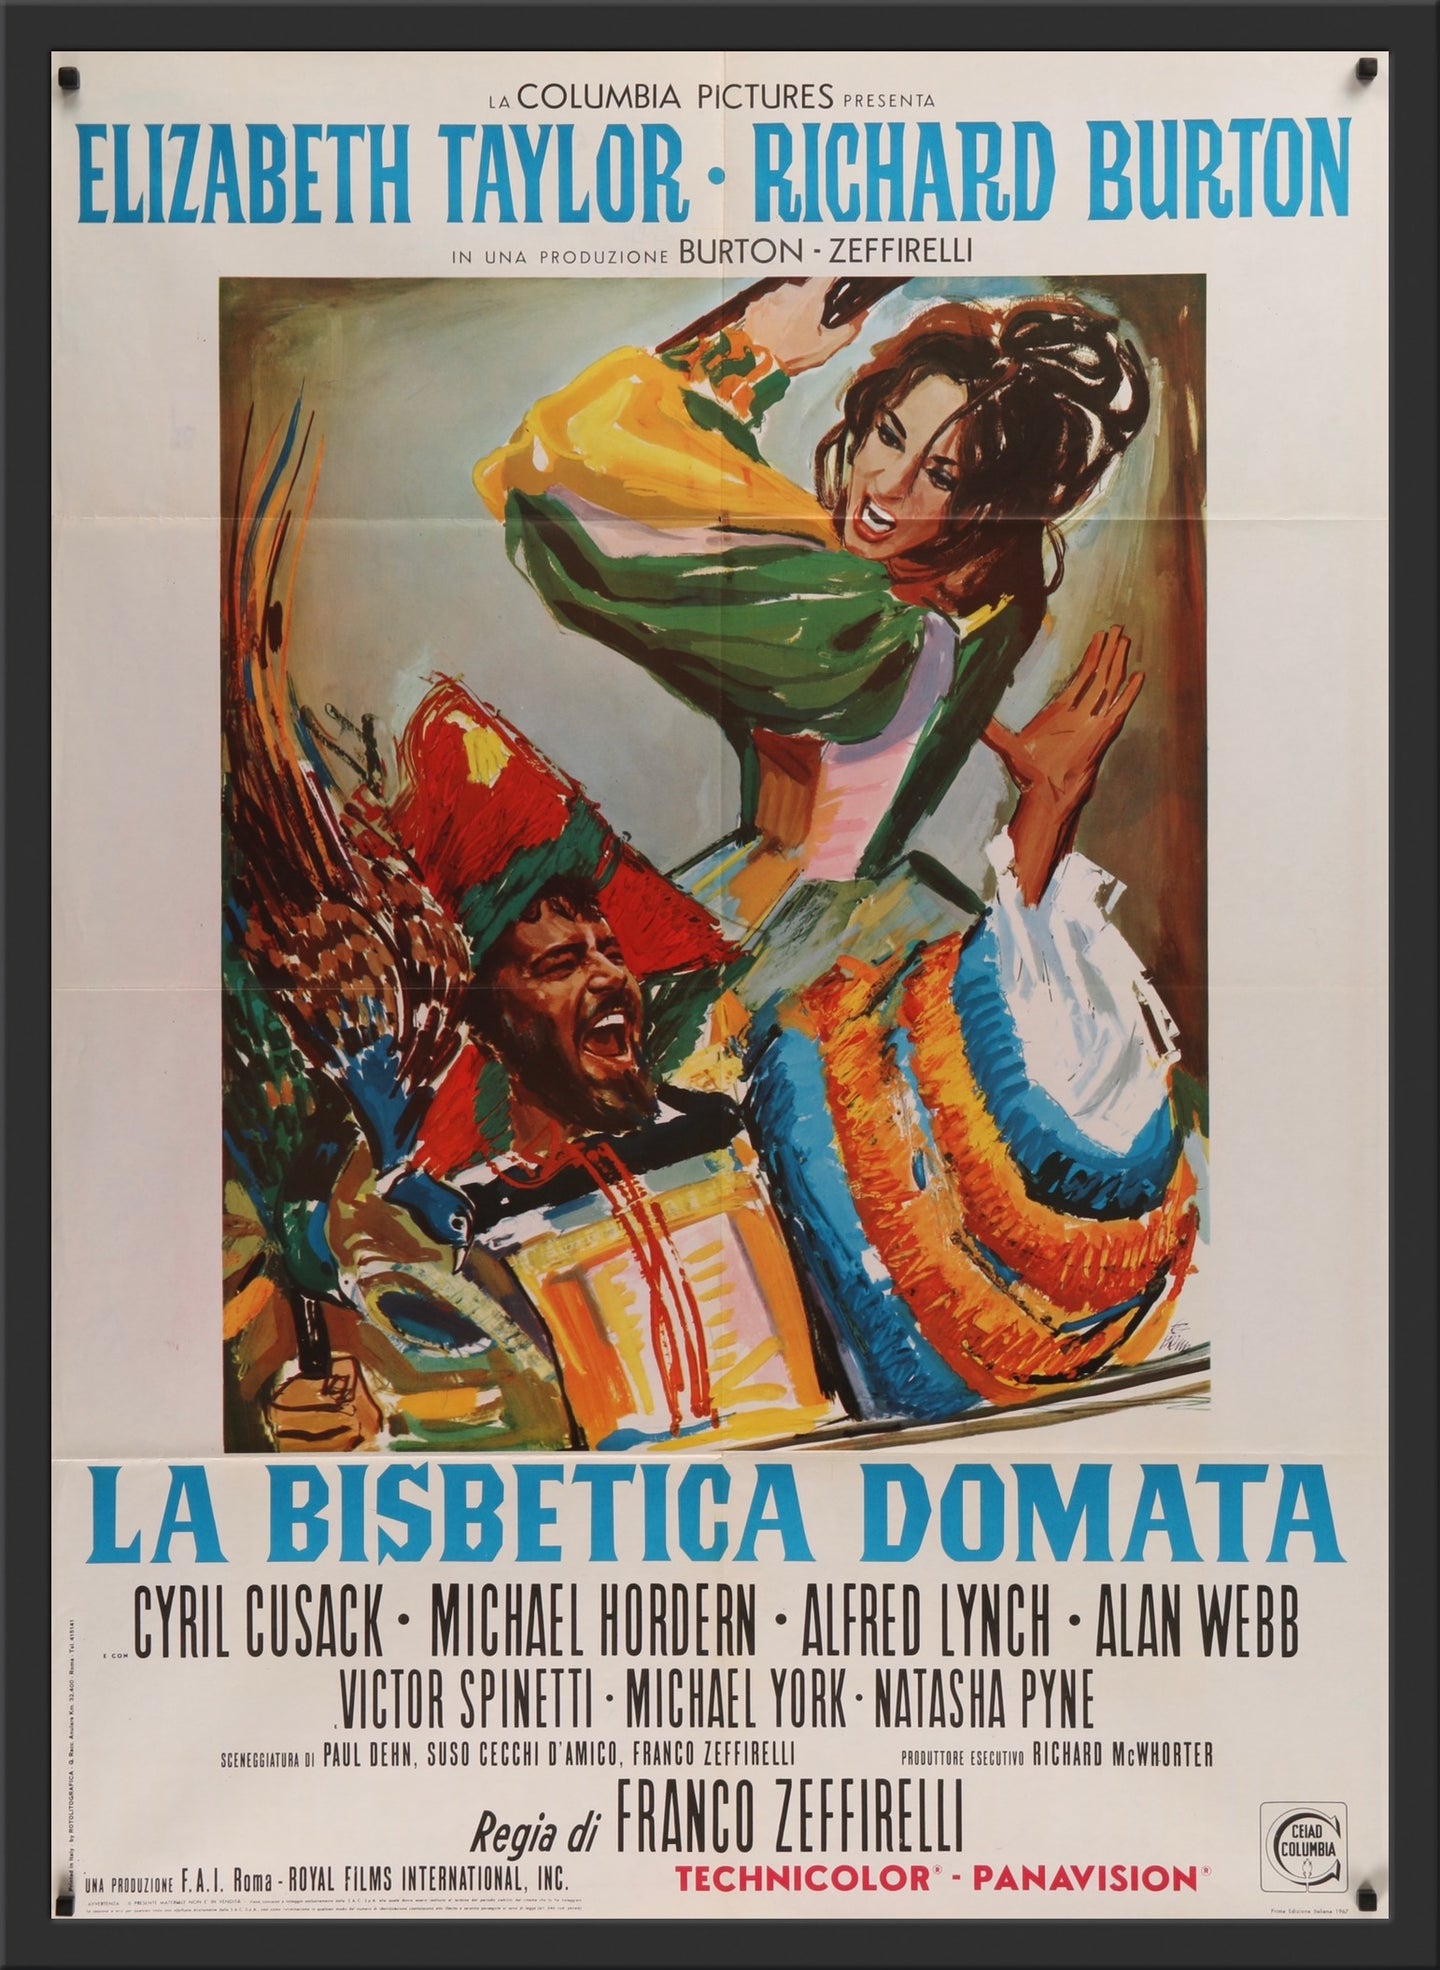 An original Italian movie poster for the Richard Burton and Elizabeth Taylor film Taming of the Shrew